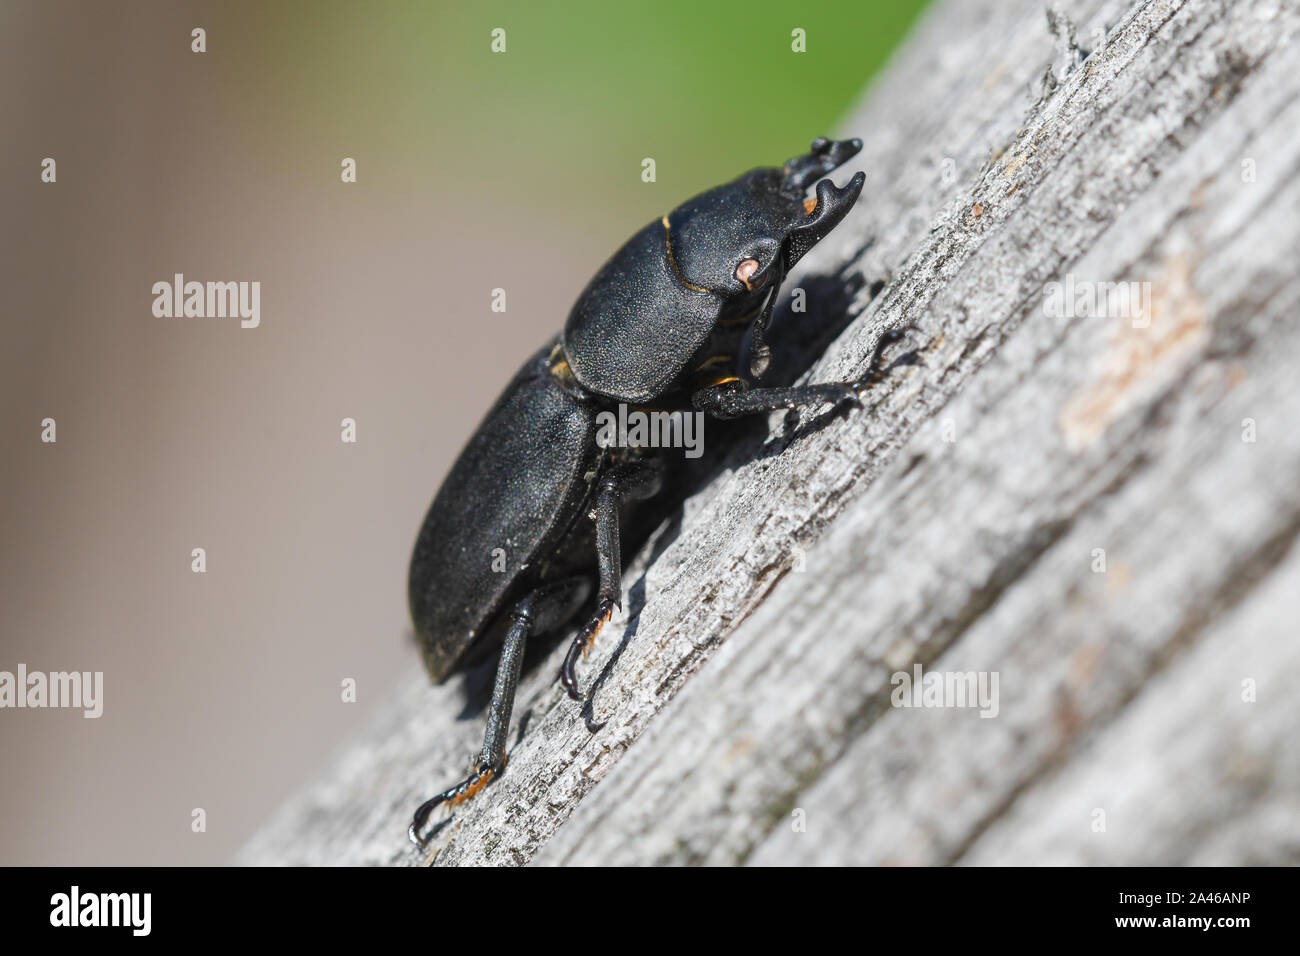 Close-up of lesser stag beetle an over a dry log Stock Photo